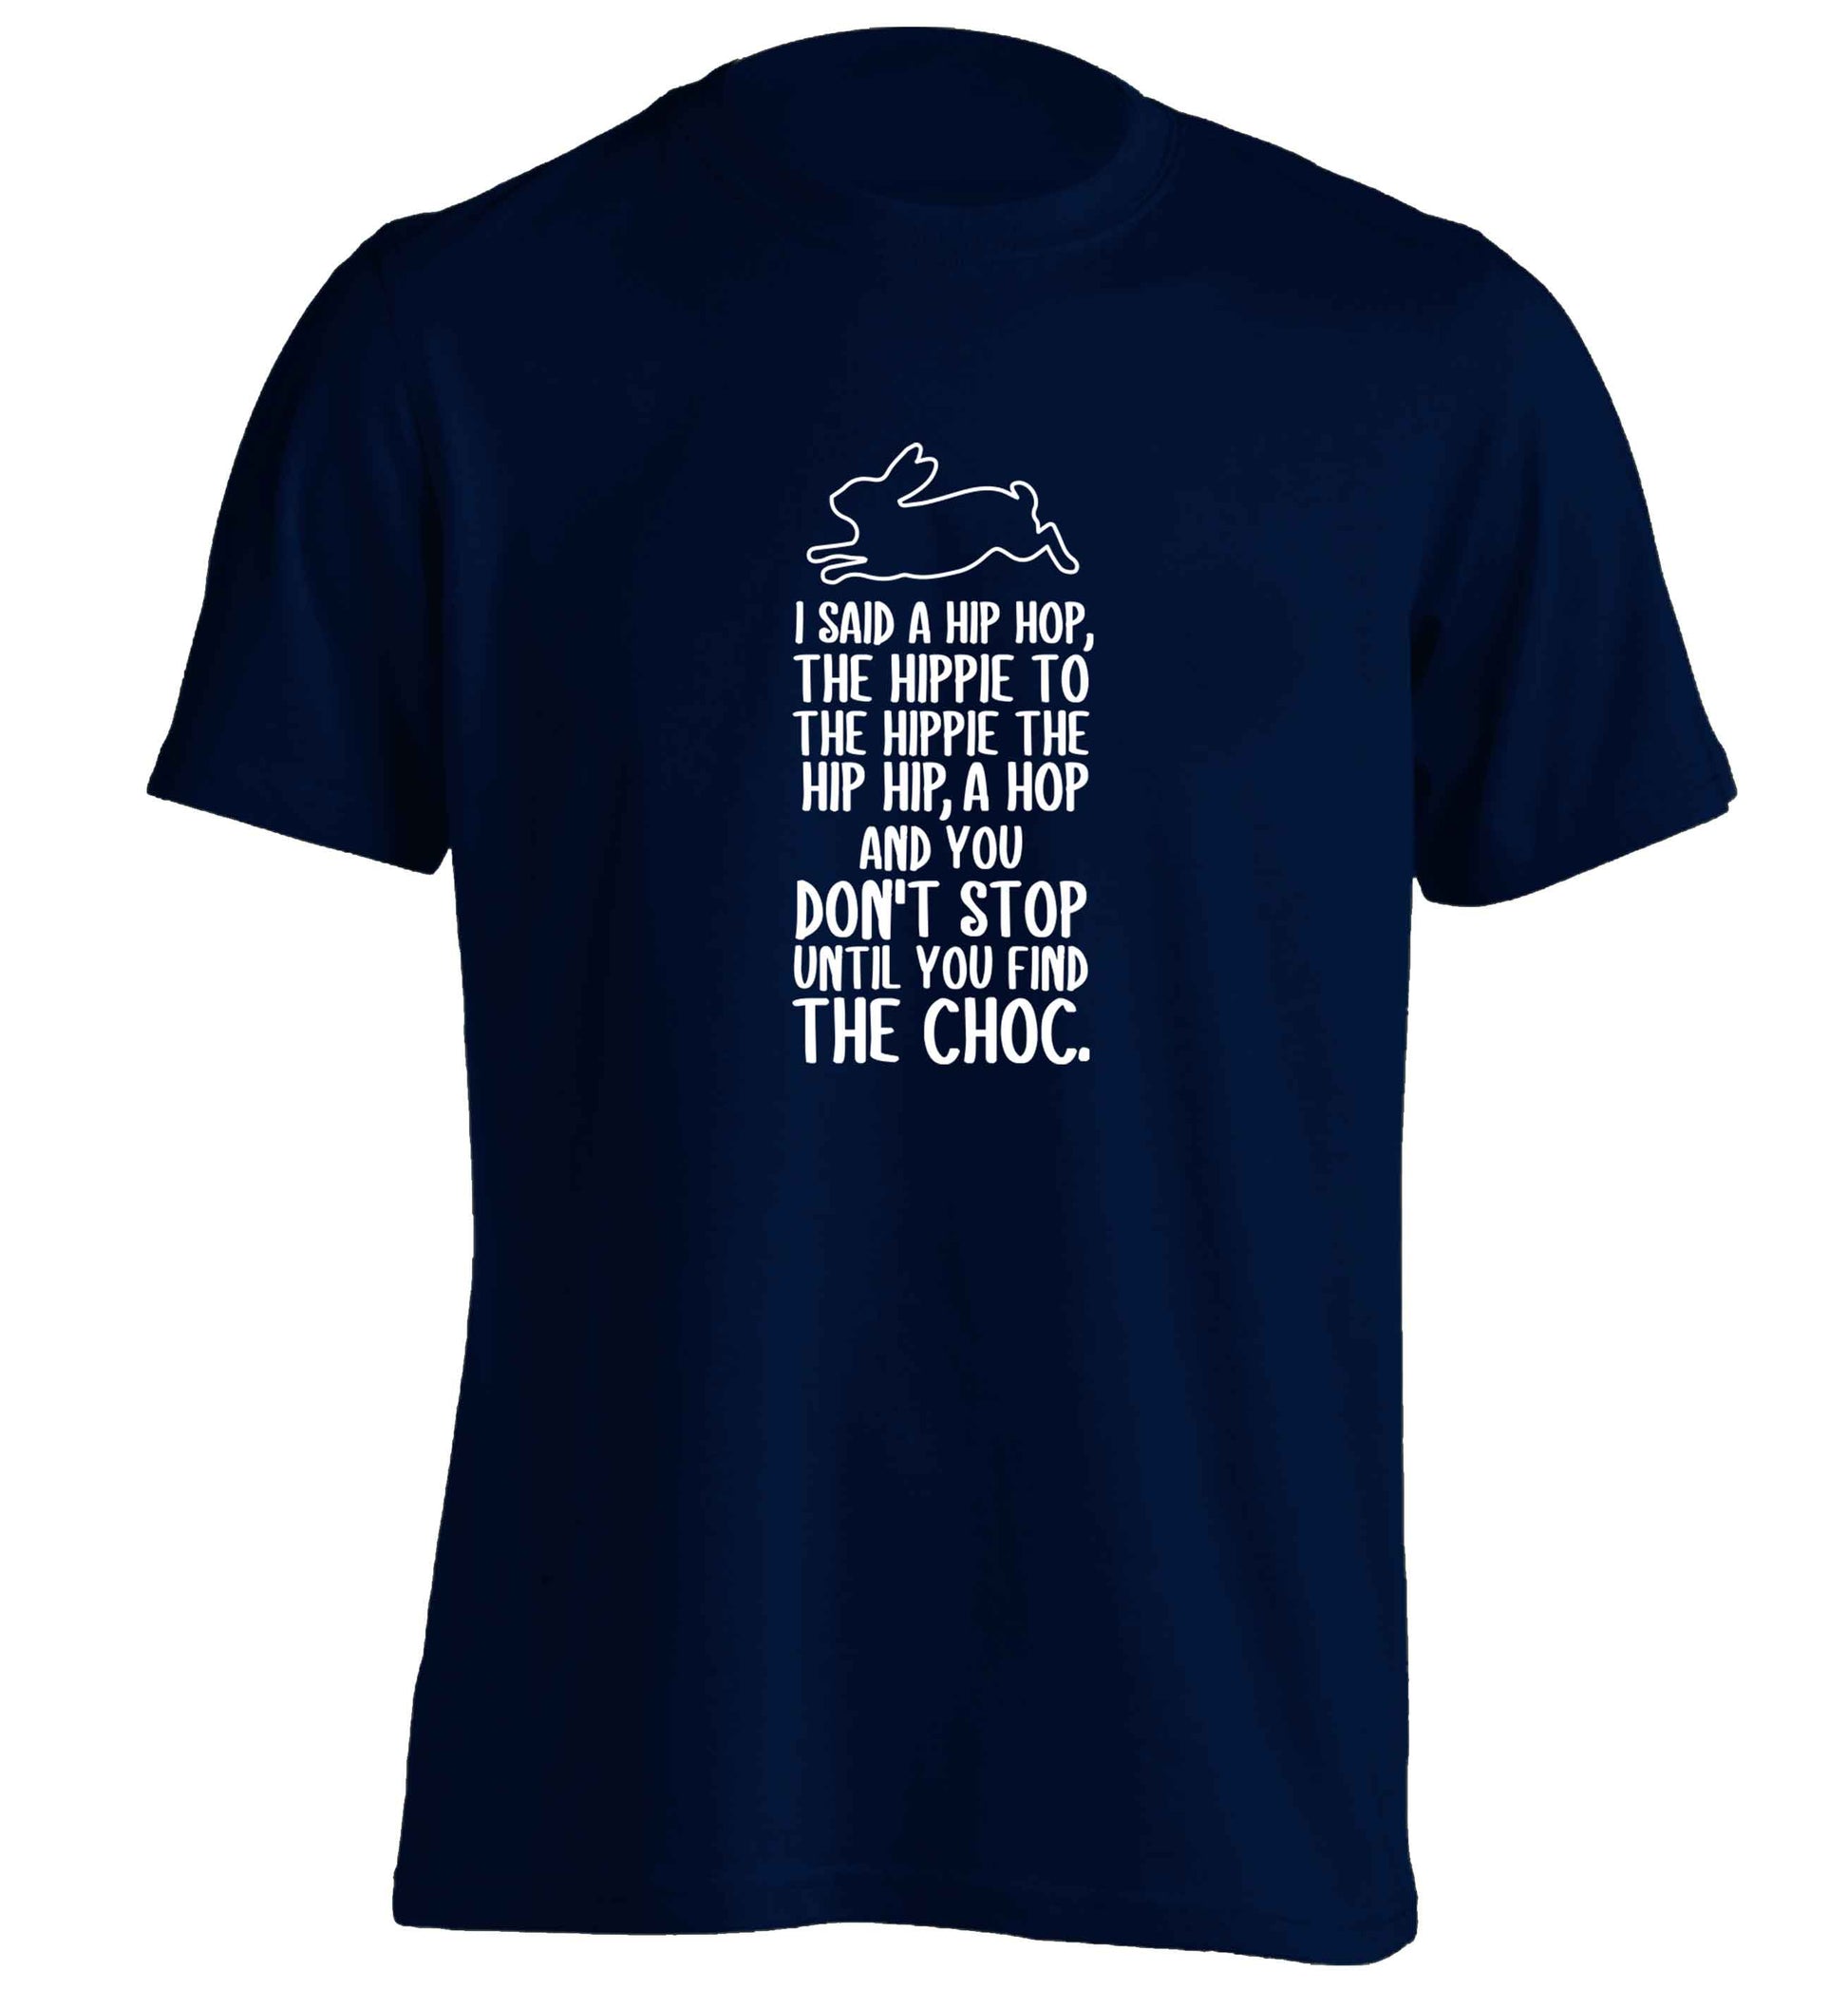 Don't stop until you find the choc adults unisex navy Tshirt 2XL